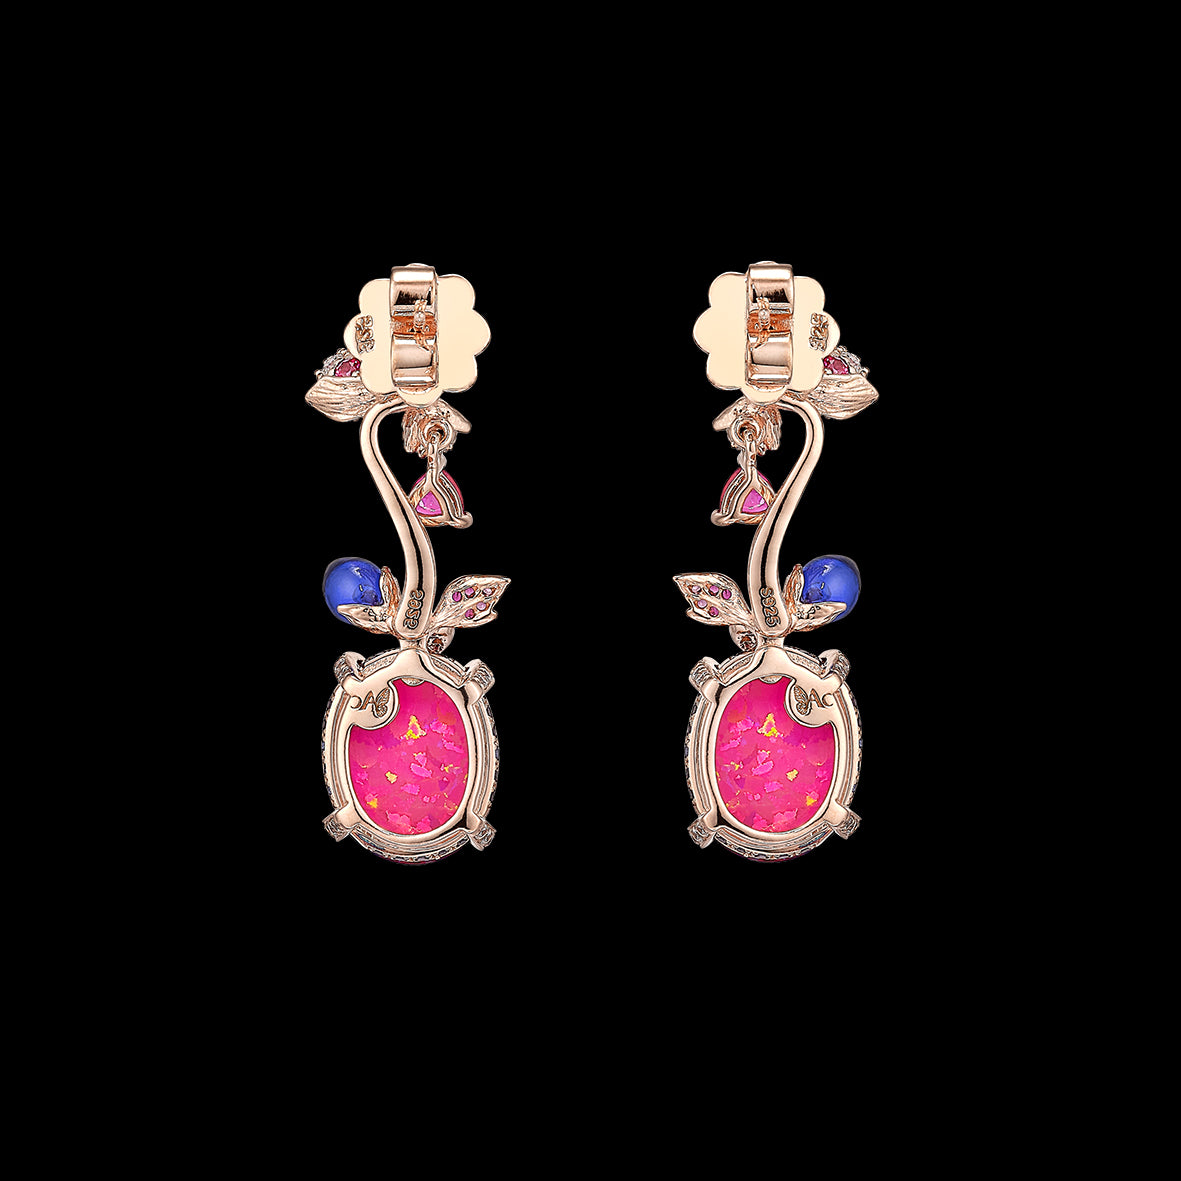 Violet Opal Carnivora Earrings, Earrings, Anabela Chan Joaillerie - Fine jewelry with laboratory grown and created gemstones hand-crafted in the United Kingdom. Anabela Chan Joaillerie is the first fine jewellery brand in the world to champion laboratory-grown and created gemstones with high jewellery design, artisanal craftsmanship and a focus on ethical and sustainable innovations.